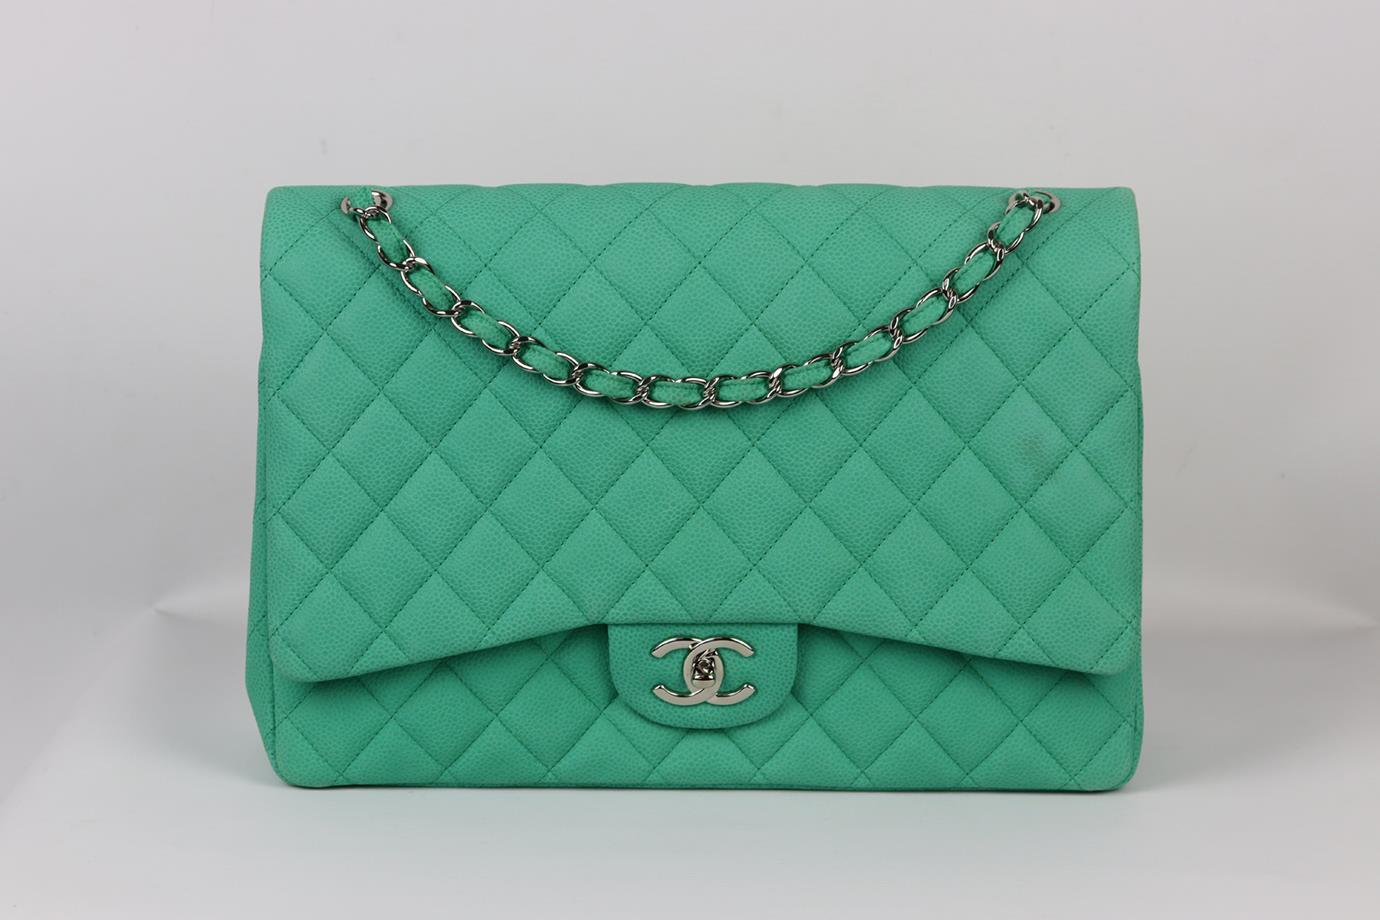 Chanel 2014 Maxi Classic quilted matte caviar eather double flap shoulder bag. Made from turquoise-green quilted matte caviar leather with matching leather interior and silver-tone hardware and chain shoulder straps. Turquoise-green. Twist lock